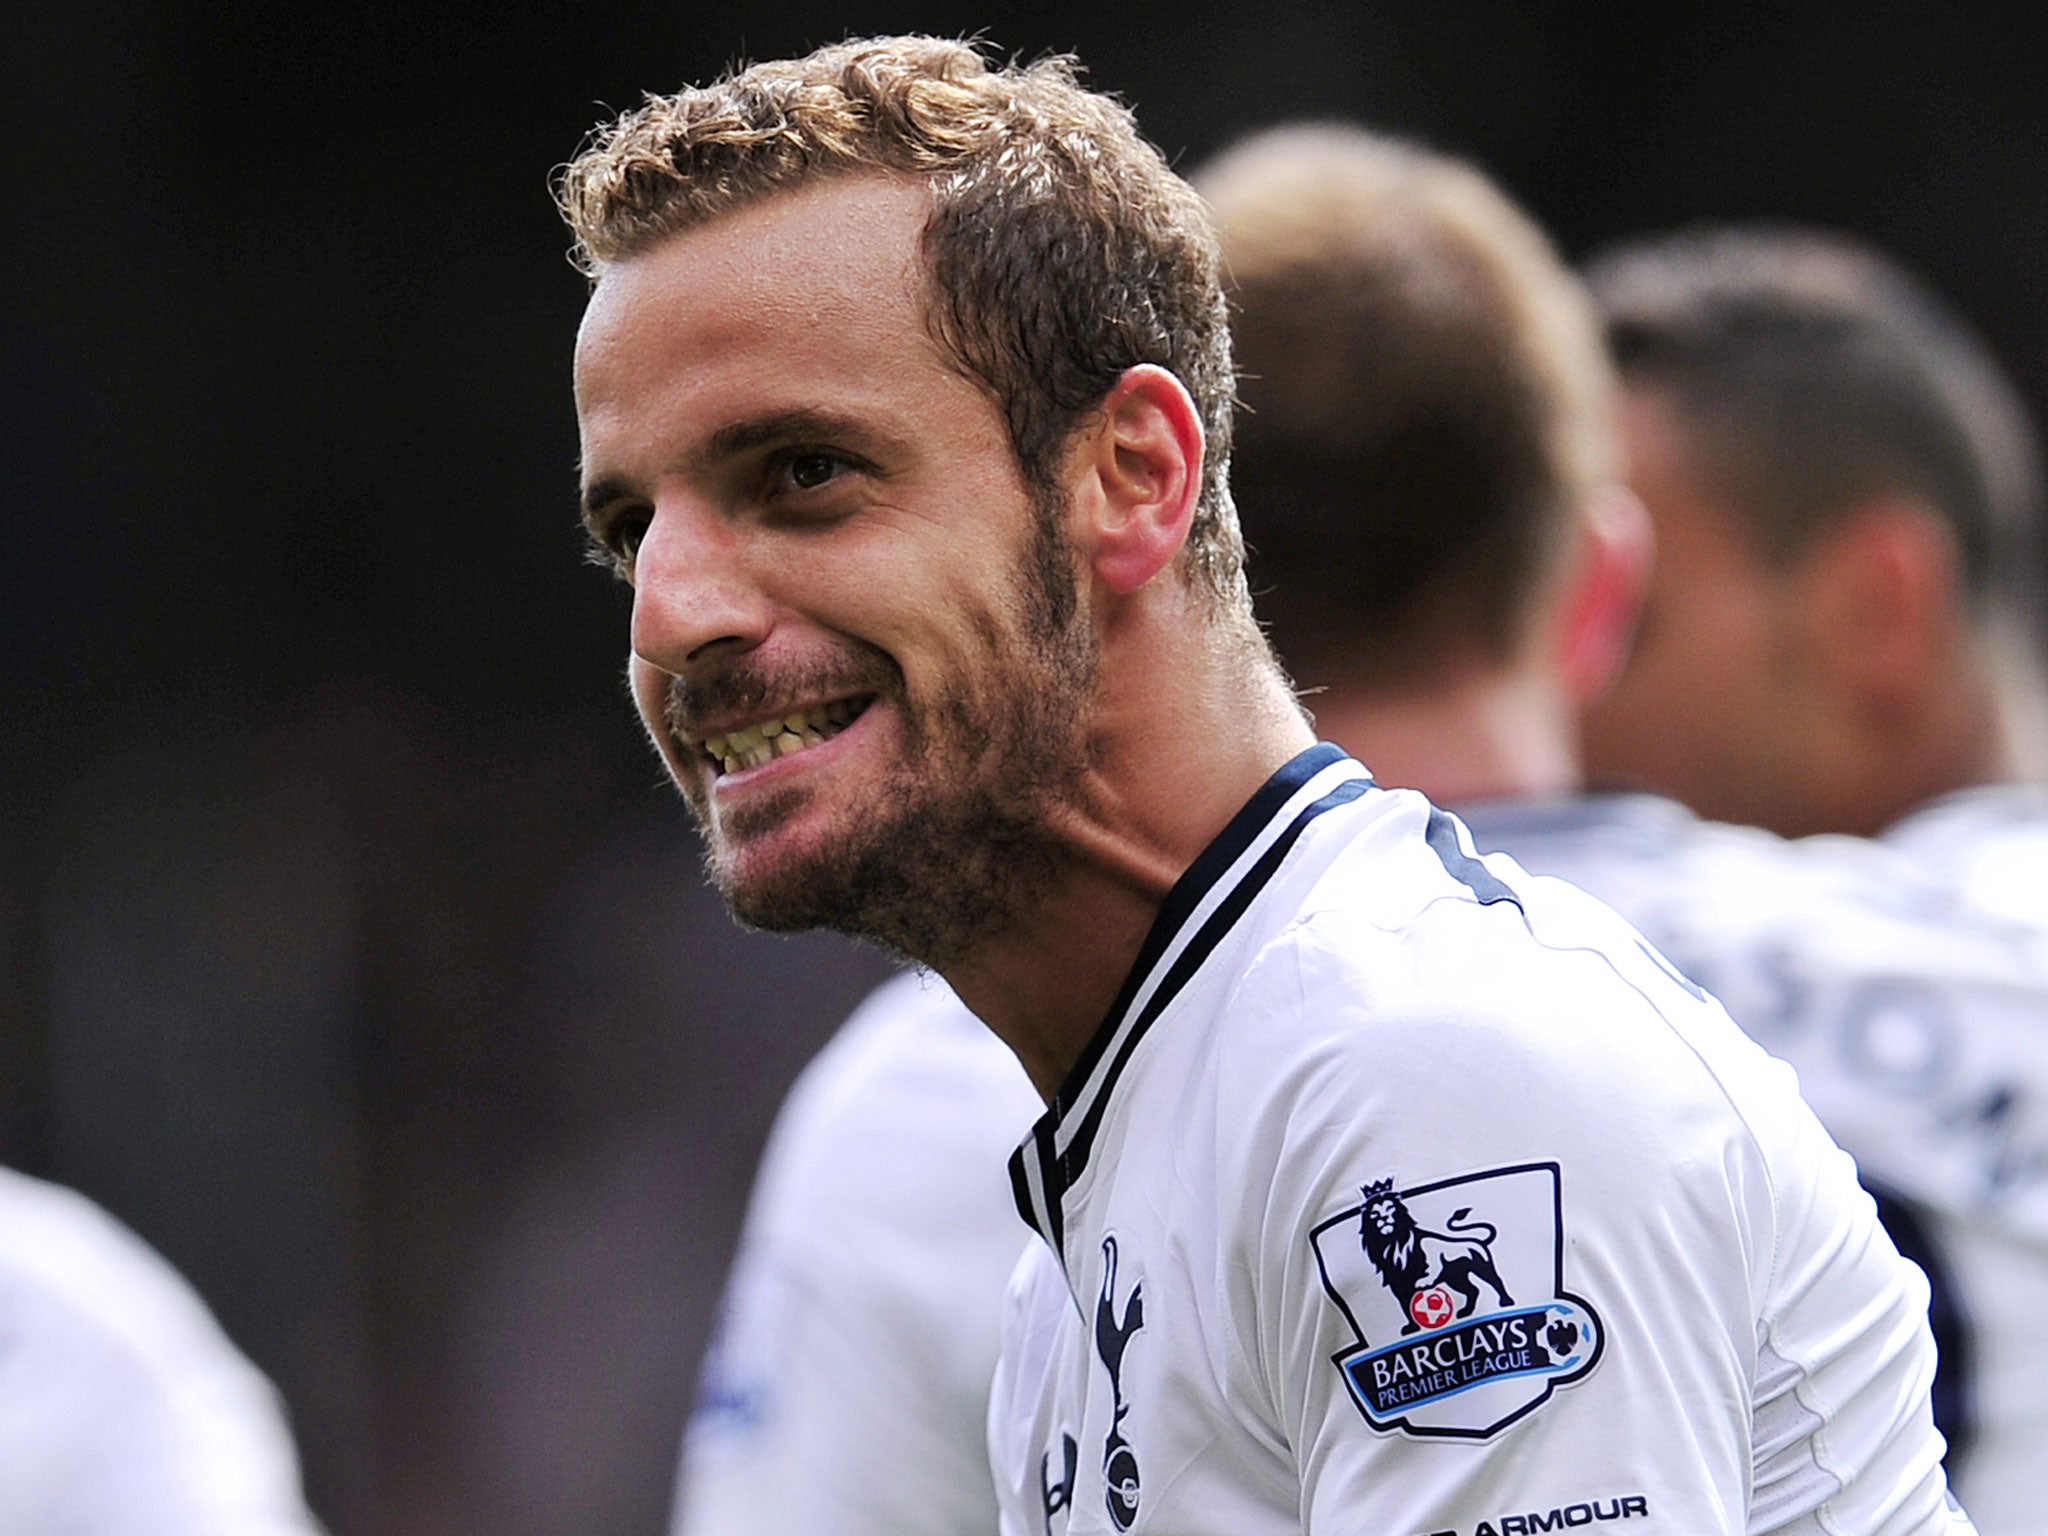 Roberto Soldado has scored three goals in his first two matches for Tottenham